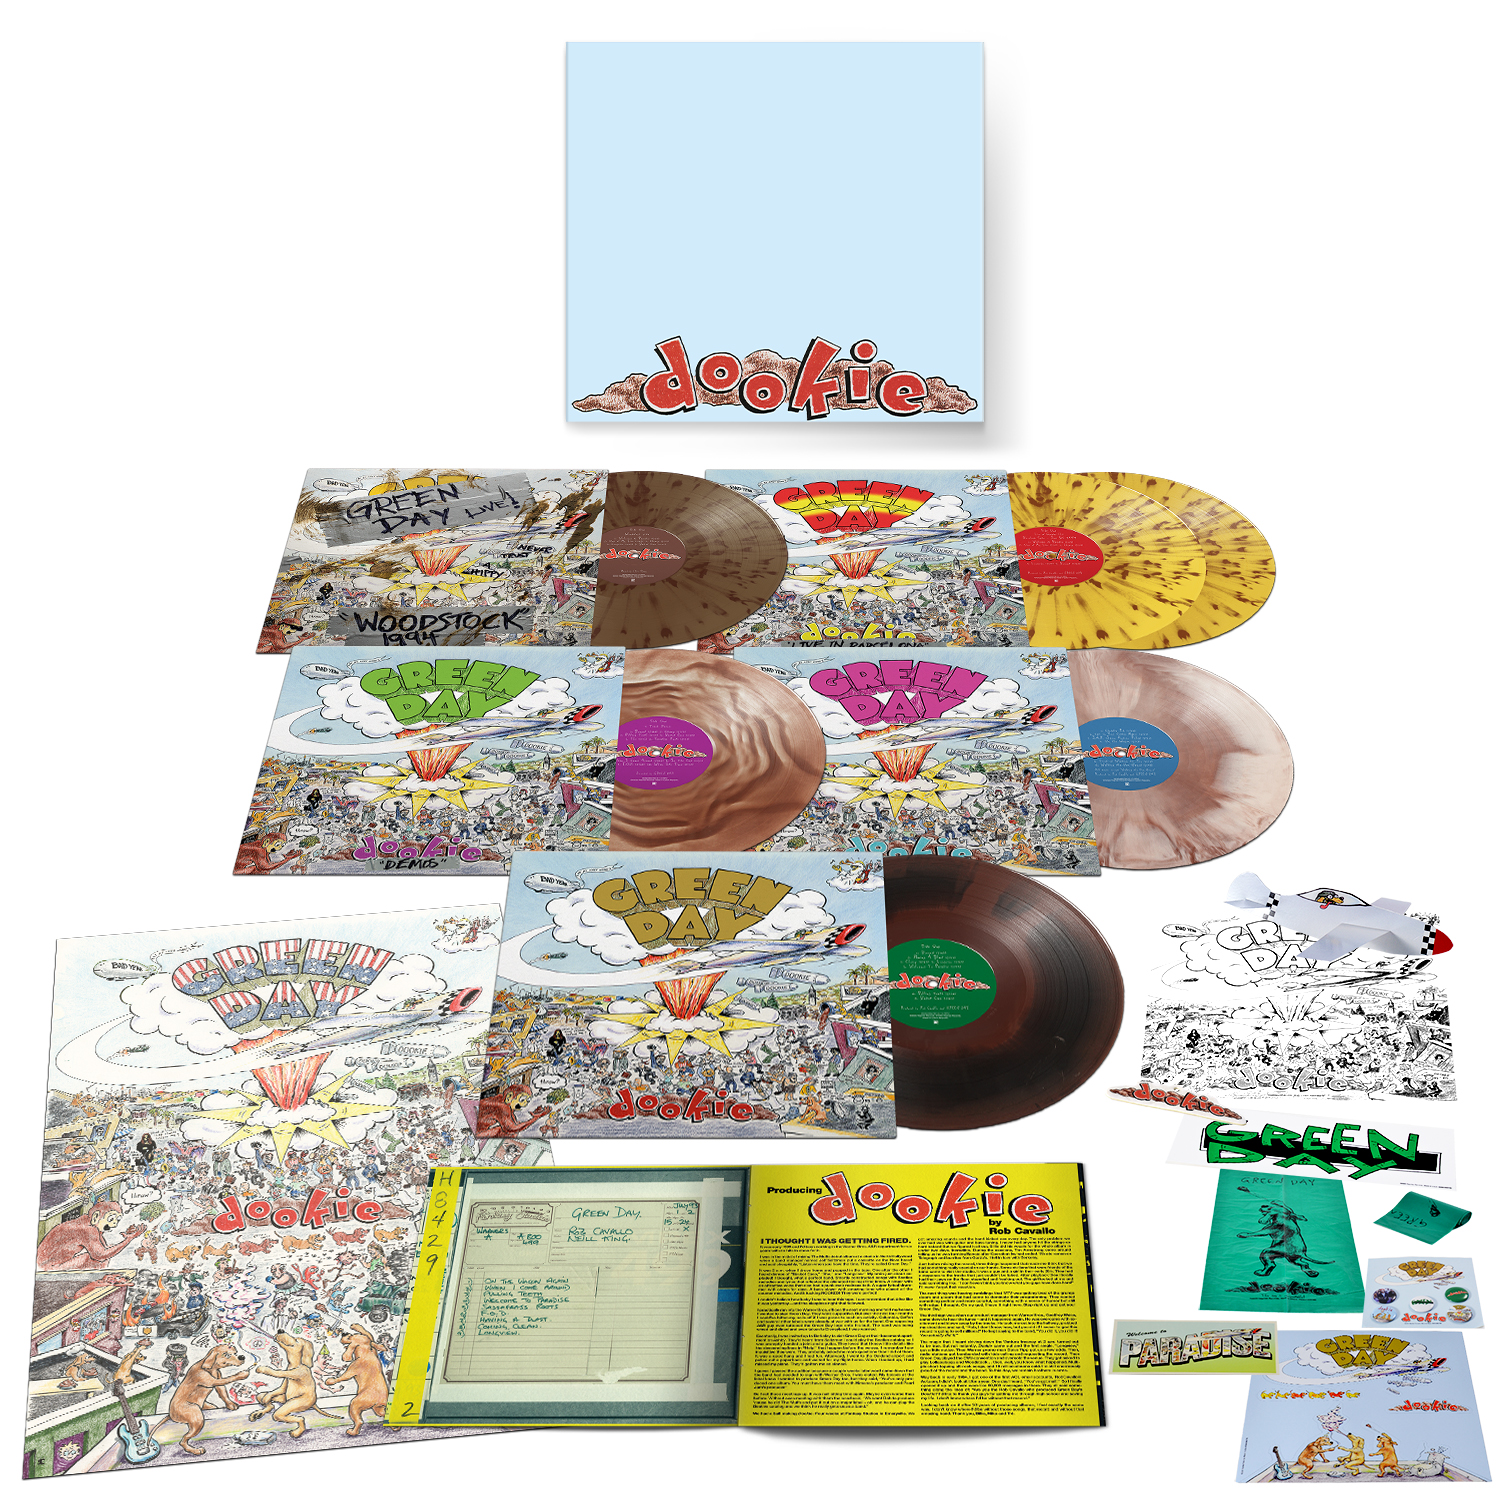 Elendighed luge Ritual Dookie 30th Anniversary Color Vinyl Box Set | Green Day Official Store